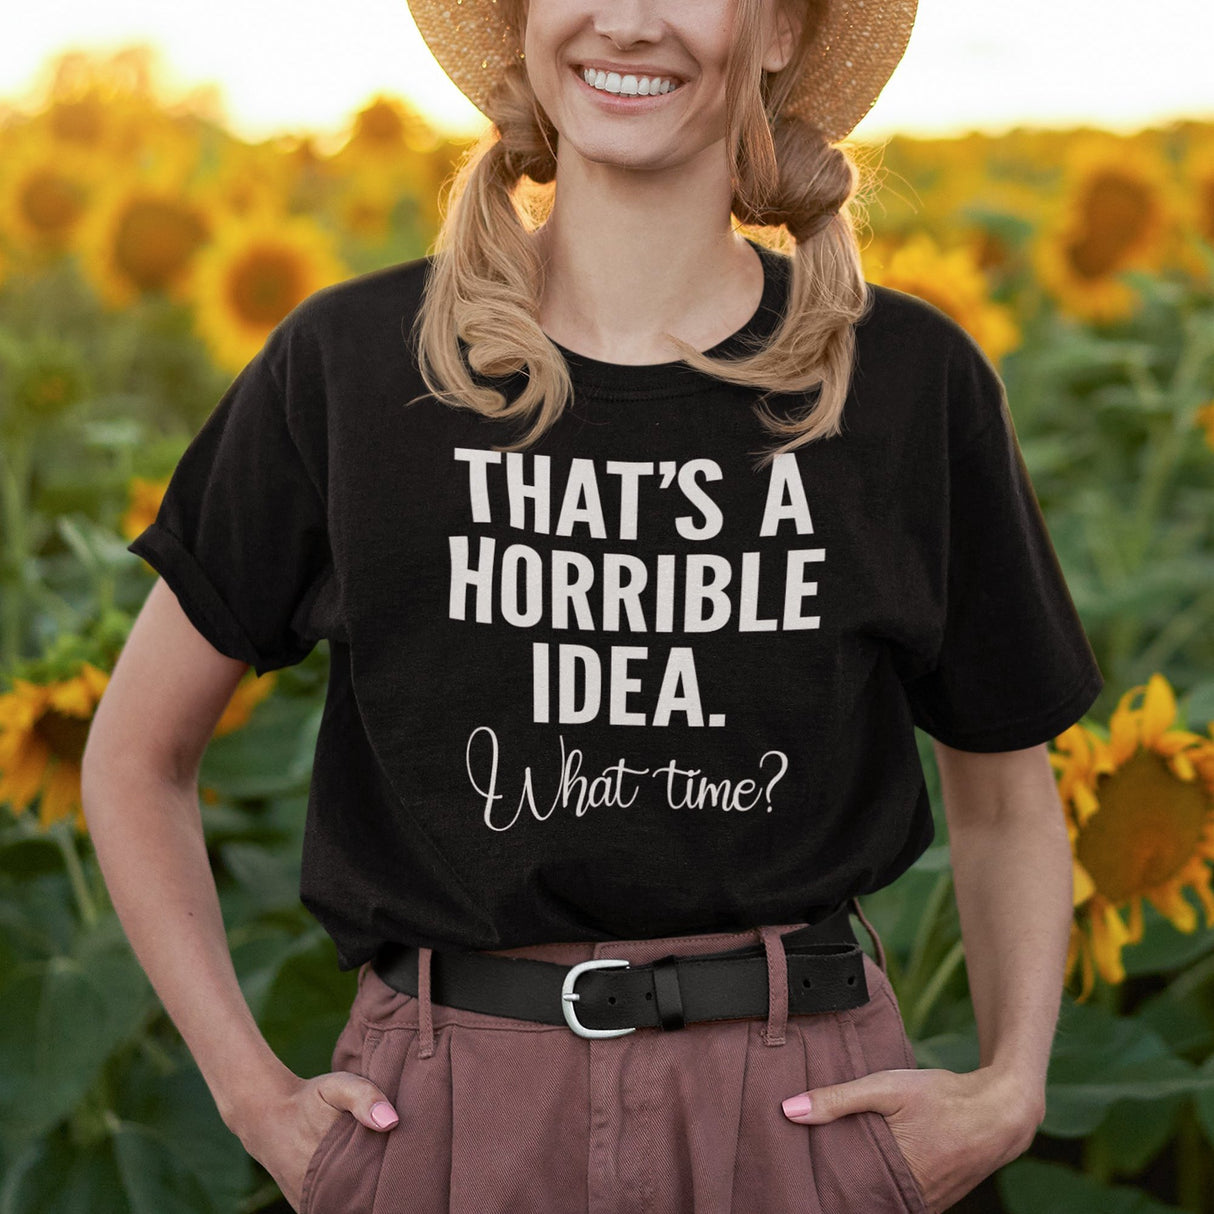 thats-a-horrible-idea-what-time-horrible-tee-idea-t-shirt-text-only-tee-funny-t-shirt-life-tee#color_black